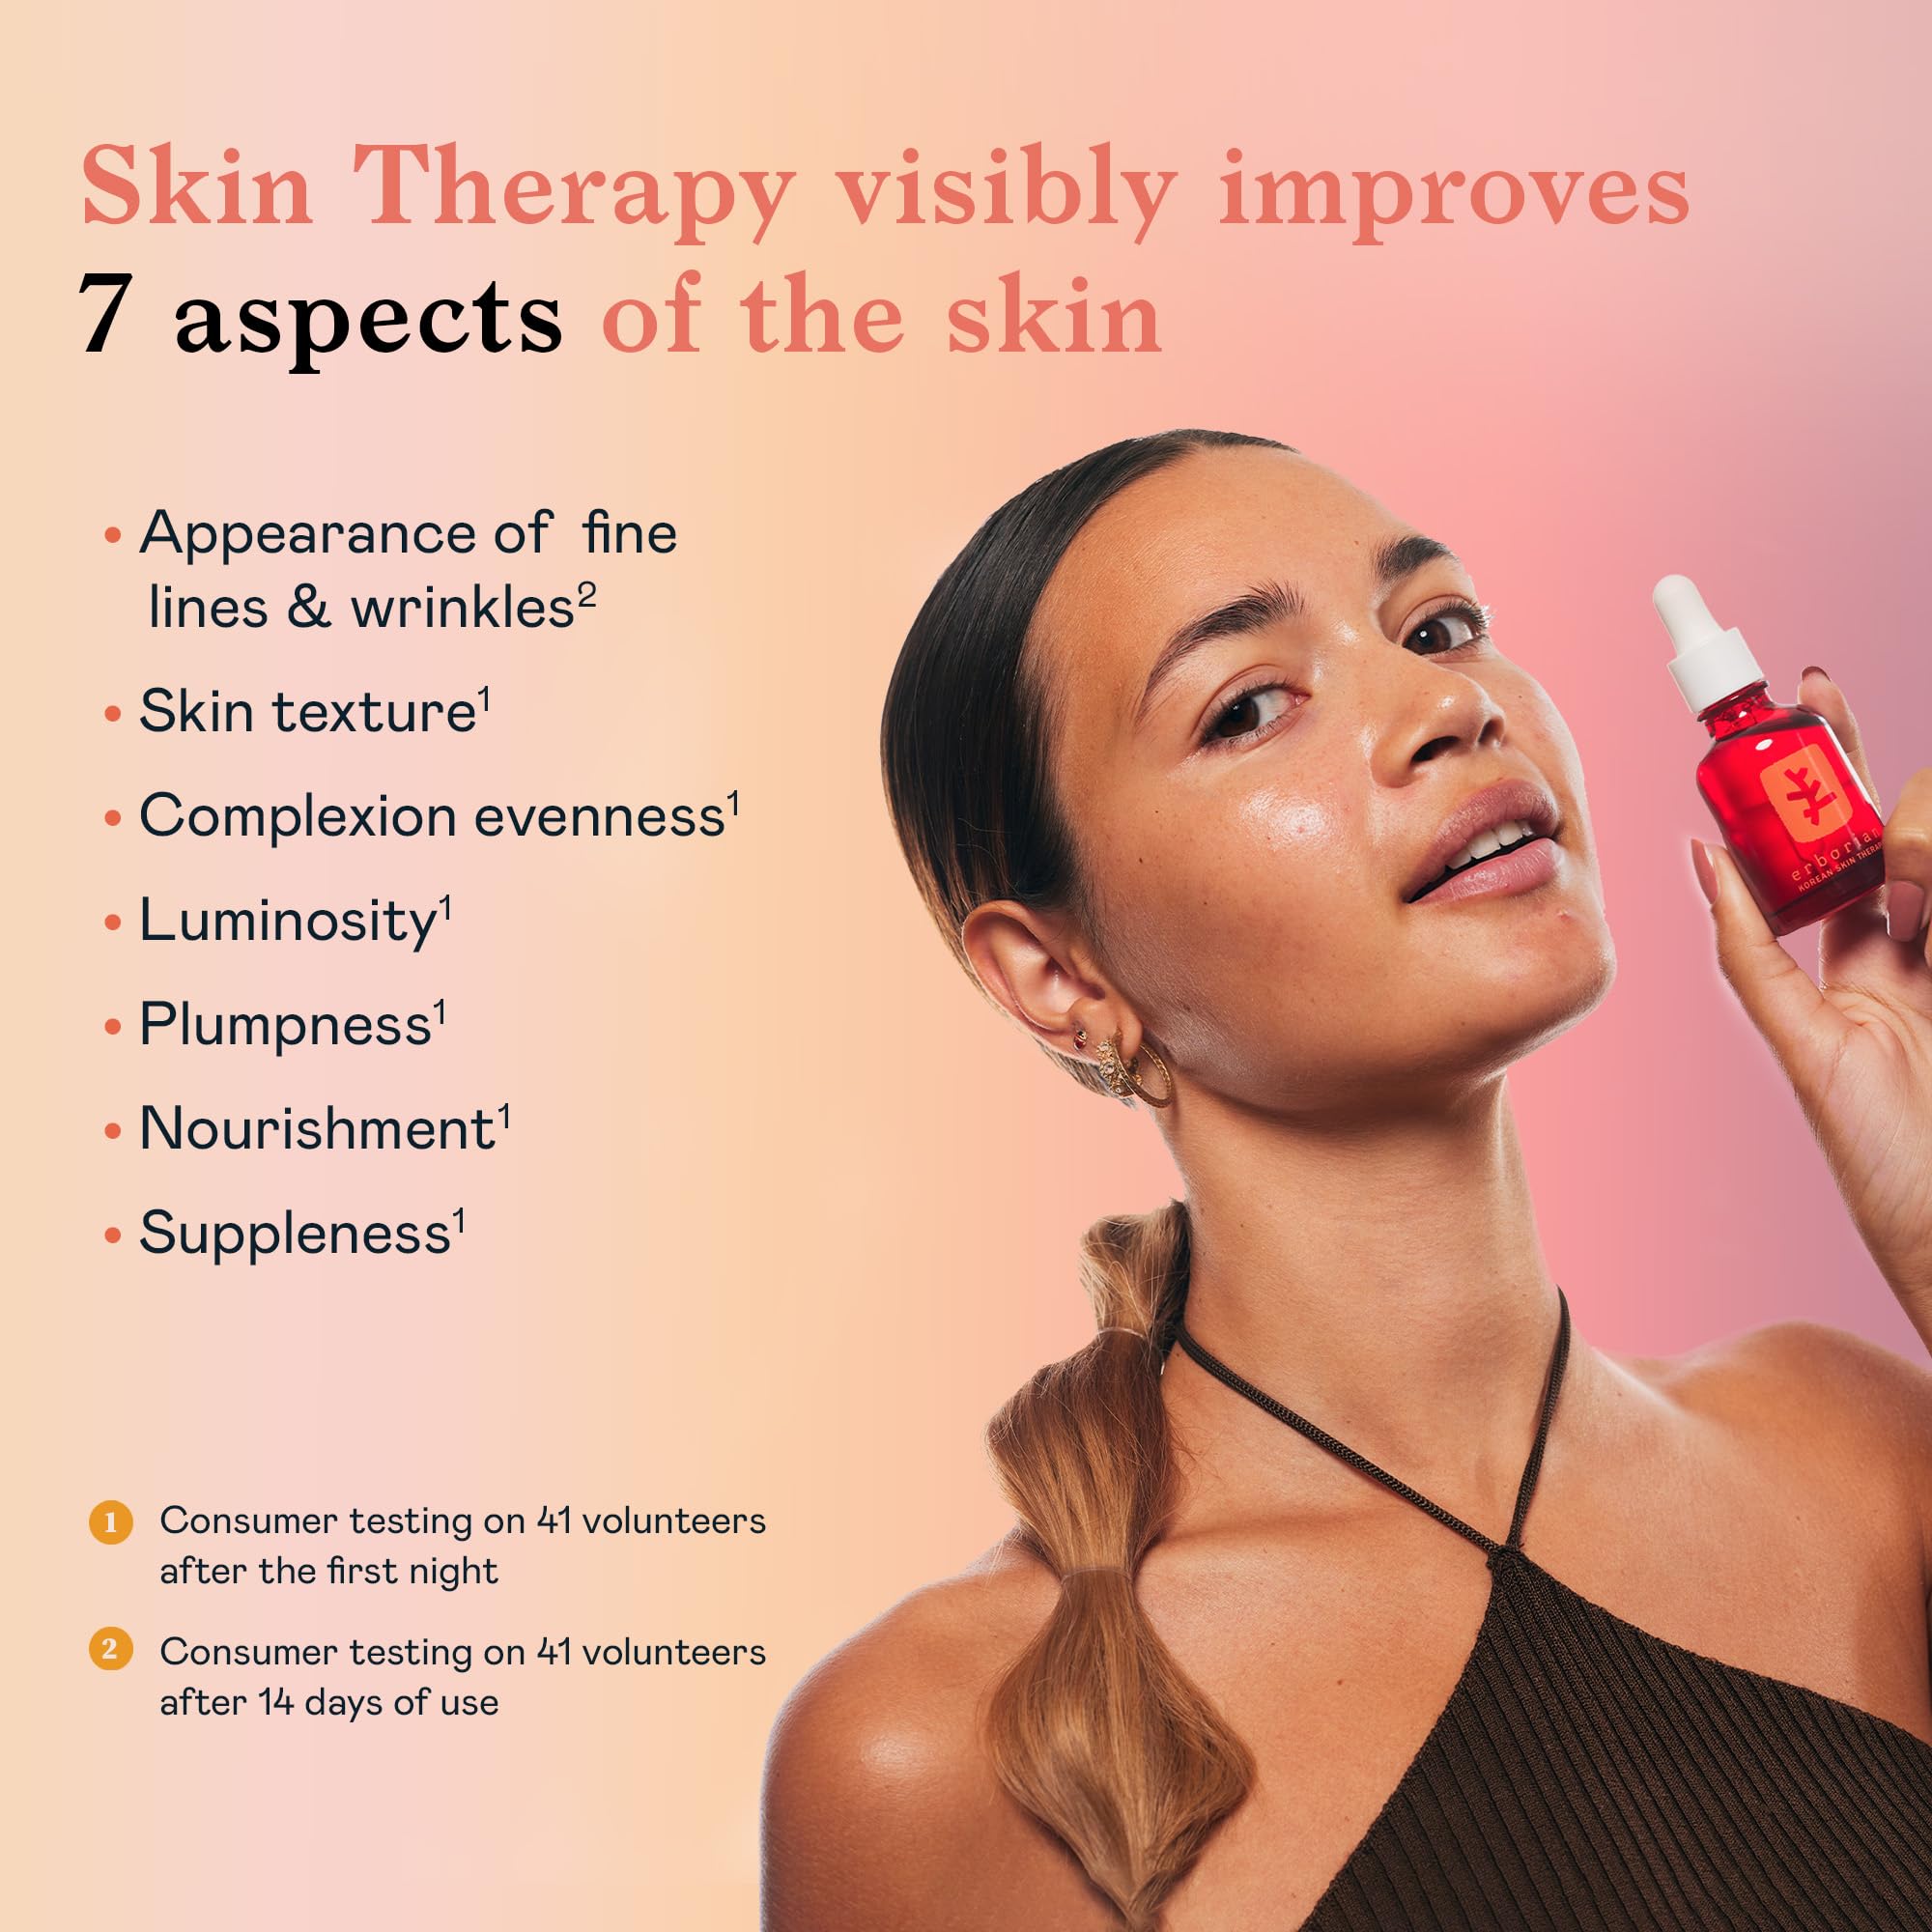 Skin Therapy Multi-Perfecting Bi-Phase Night Oil-Serum - Supercharged With 17 Ingredients -Targets 7 Skin Concerns- Improves Appearance of Fine Lines, Skin Texture and Complexion Evenness (0.33 Fl Oz)